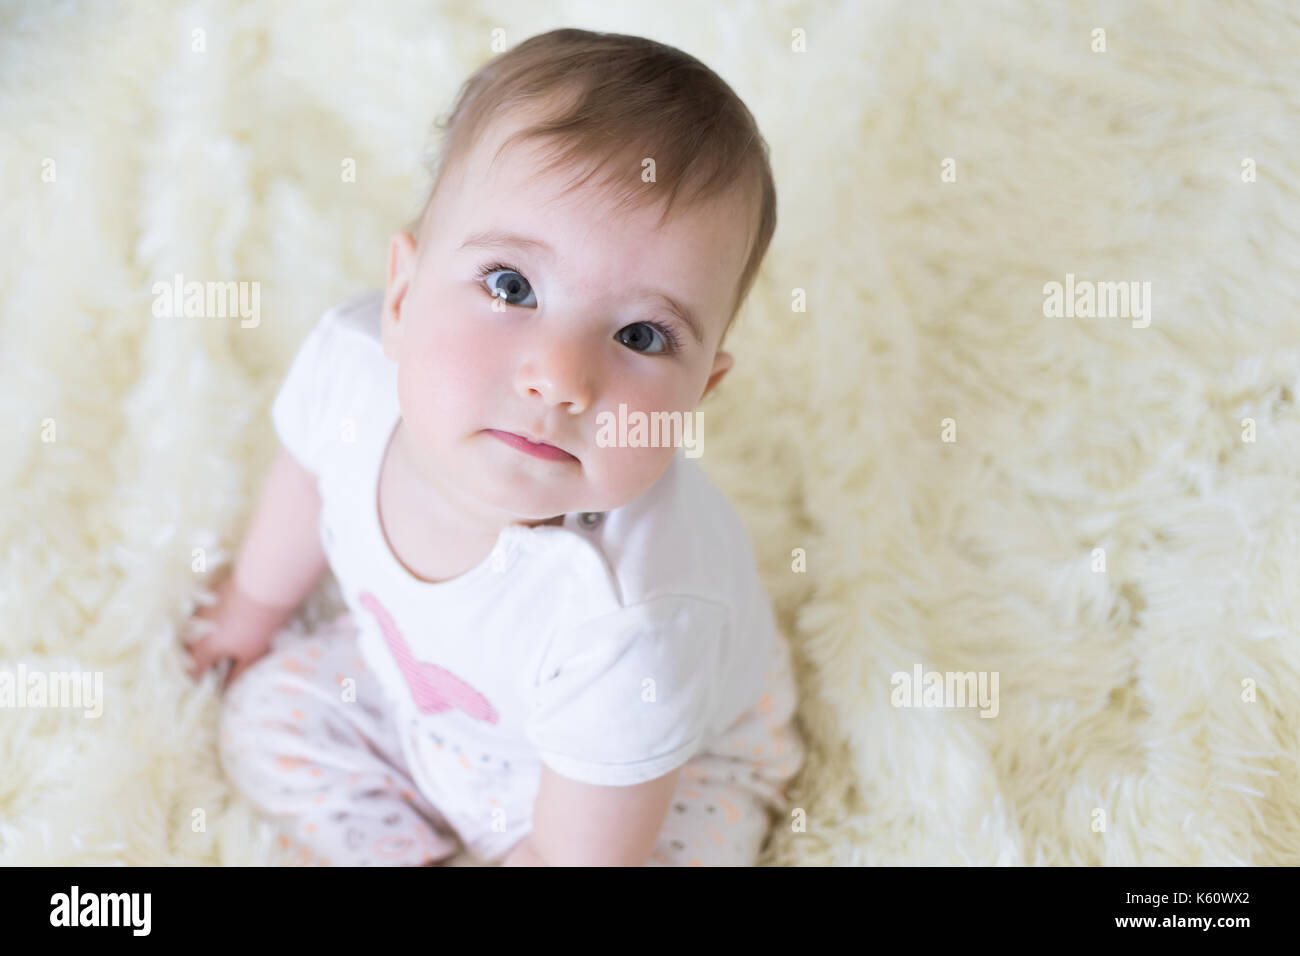 Small child looking up sitting on the bed closeup portrait. Stock Photo